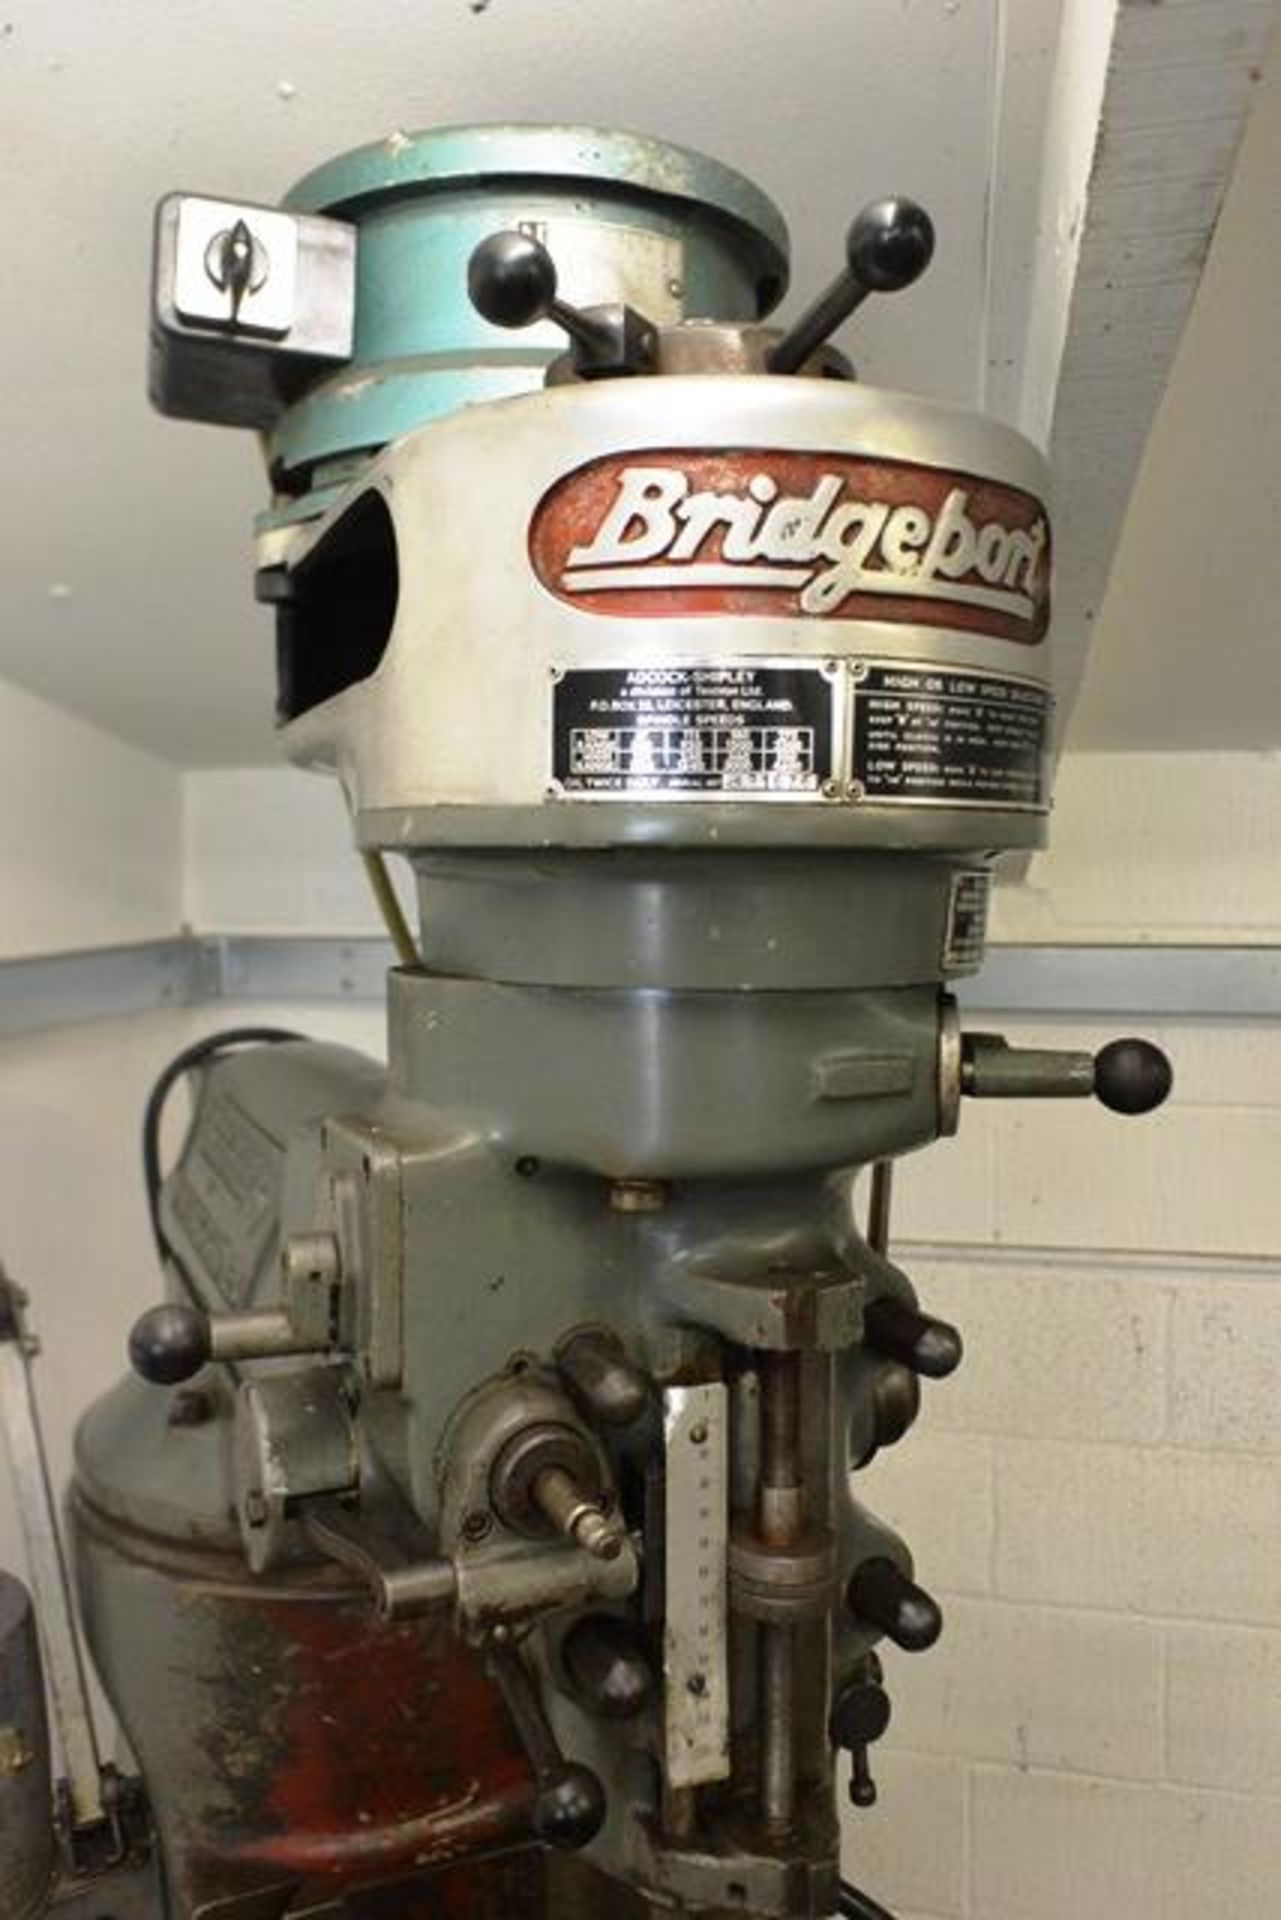 Bridgeport turret mill, serial no. JB 21676 table size 9 x 48" spindle speed: 67 - 4600 rpm (3 phase - Image 3 of 6